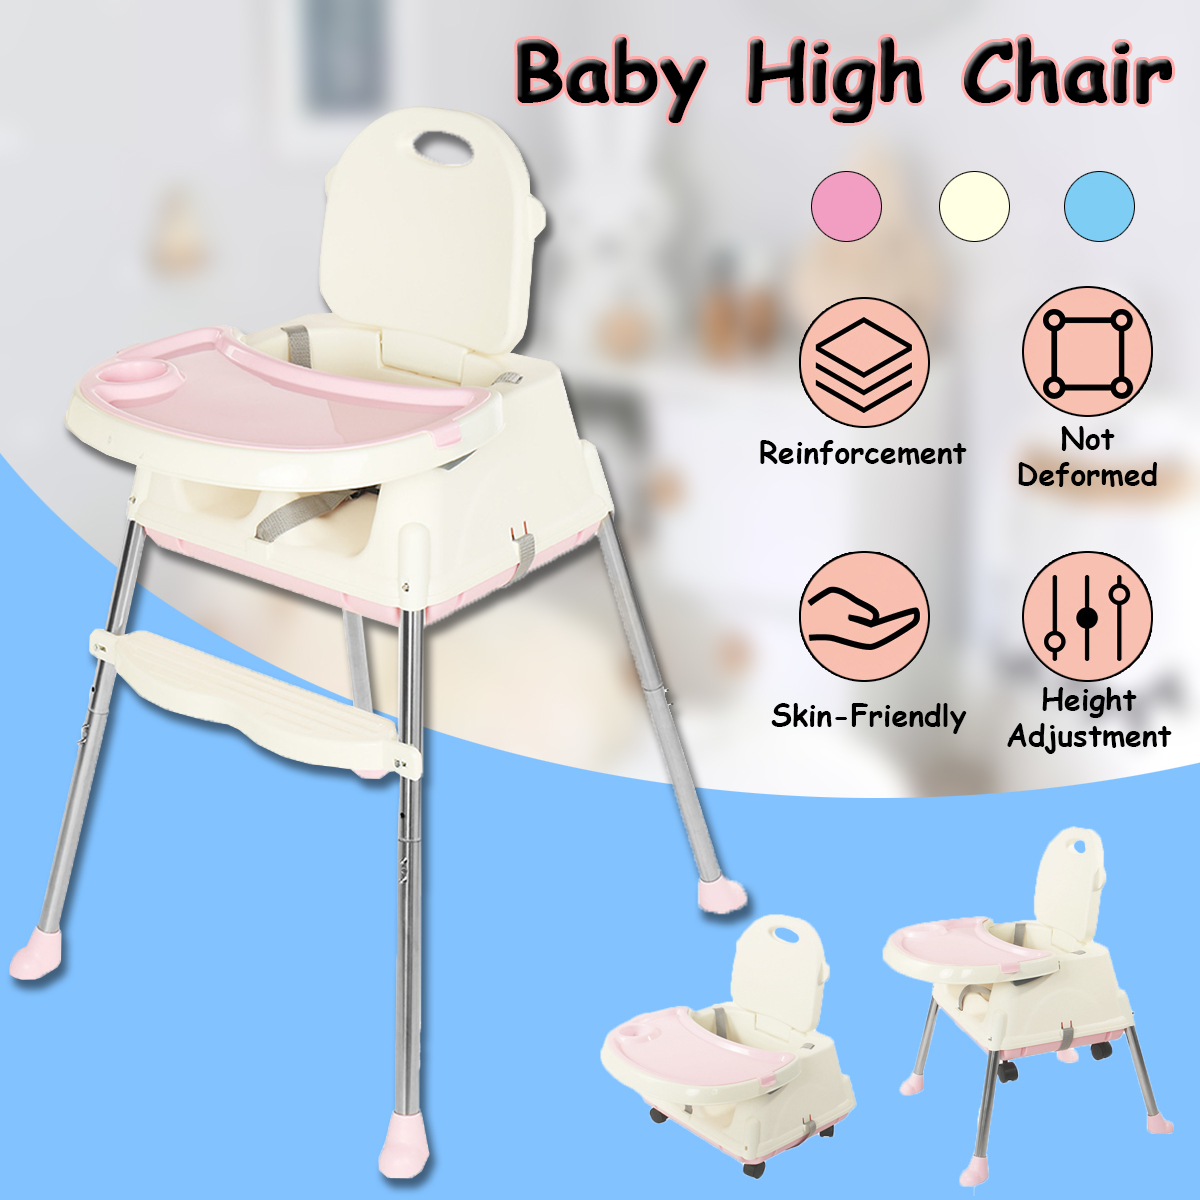 KUDOSALE-3-in-1-Adjustable-Baby-High-Chair-Table-Convertible-Play-Seat-Booster-Toddler-Feeding-with--1749429-1